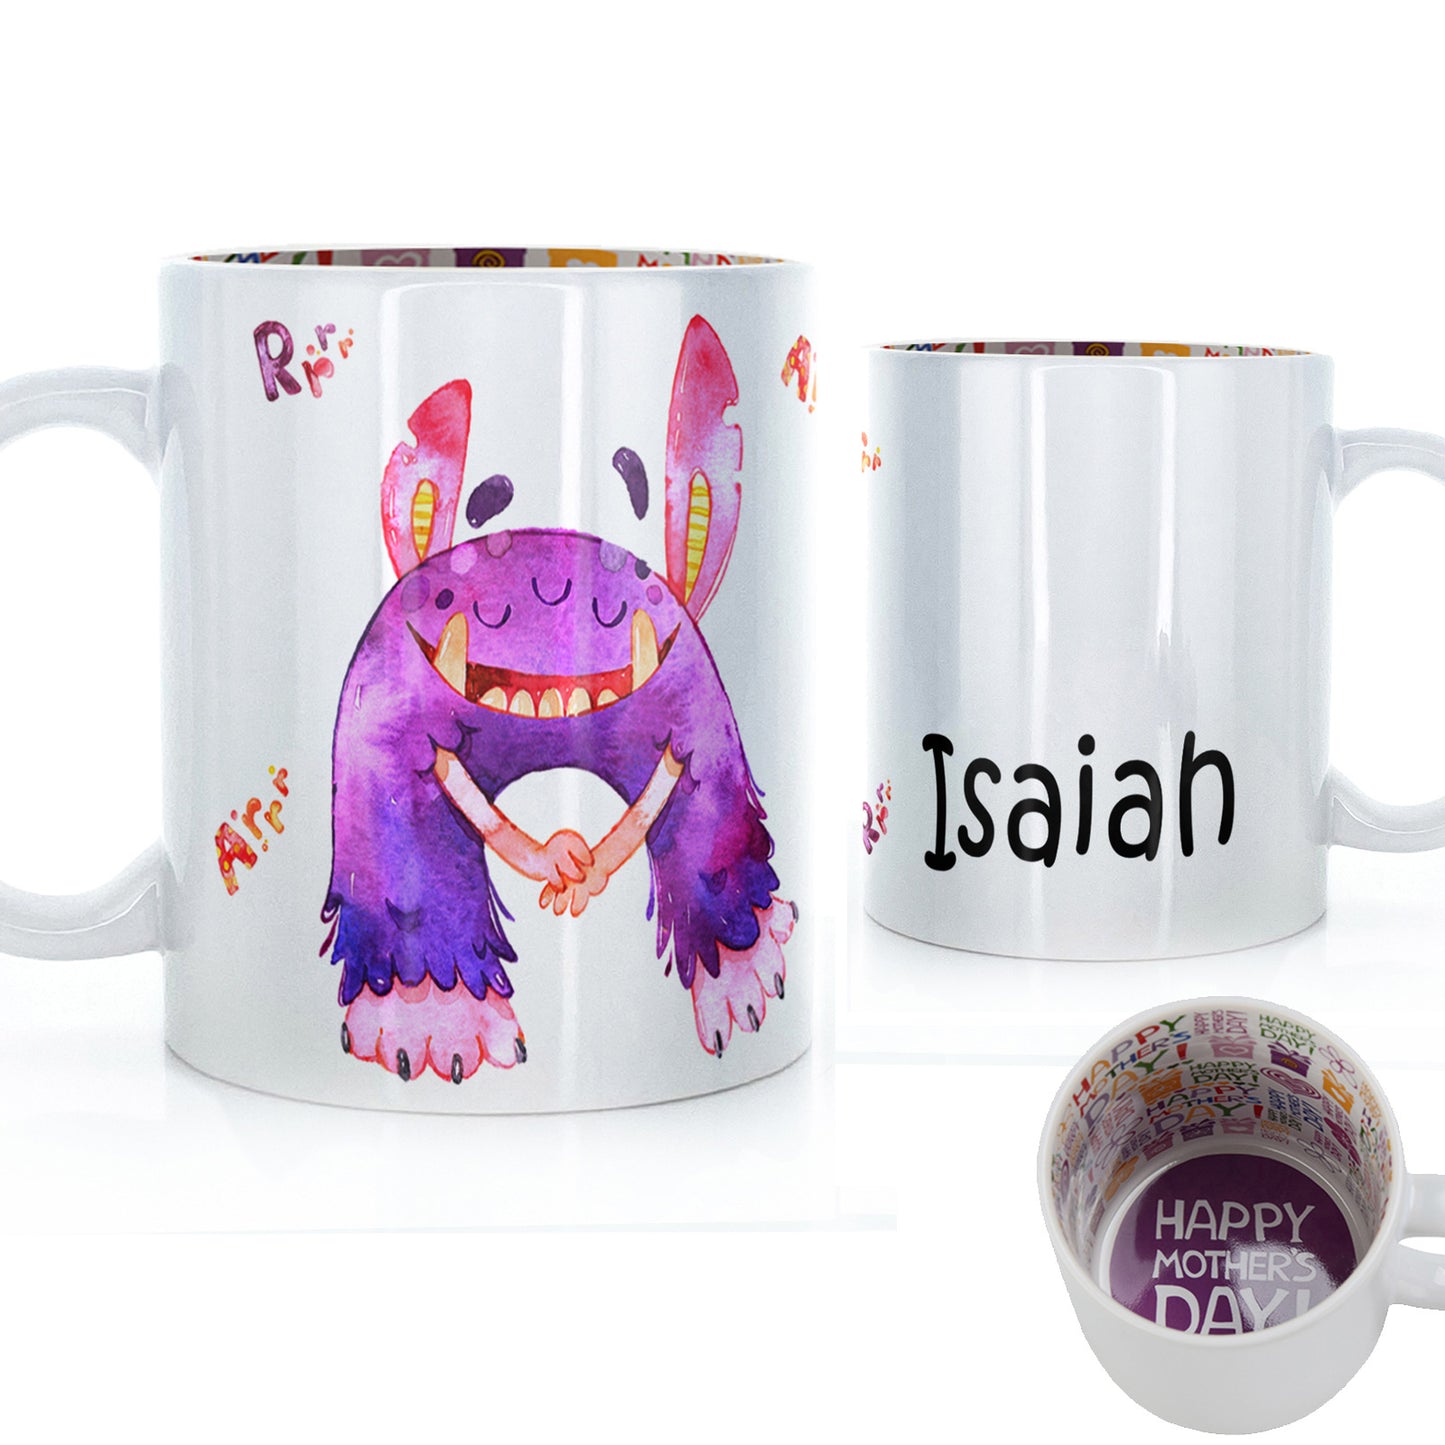 Personalised Mug with Childish Text and Furry Growling Purple Monster